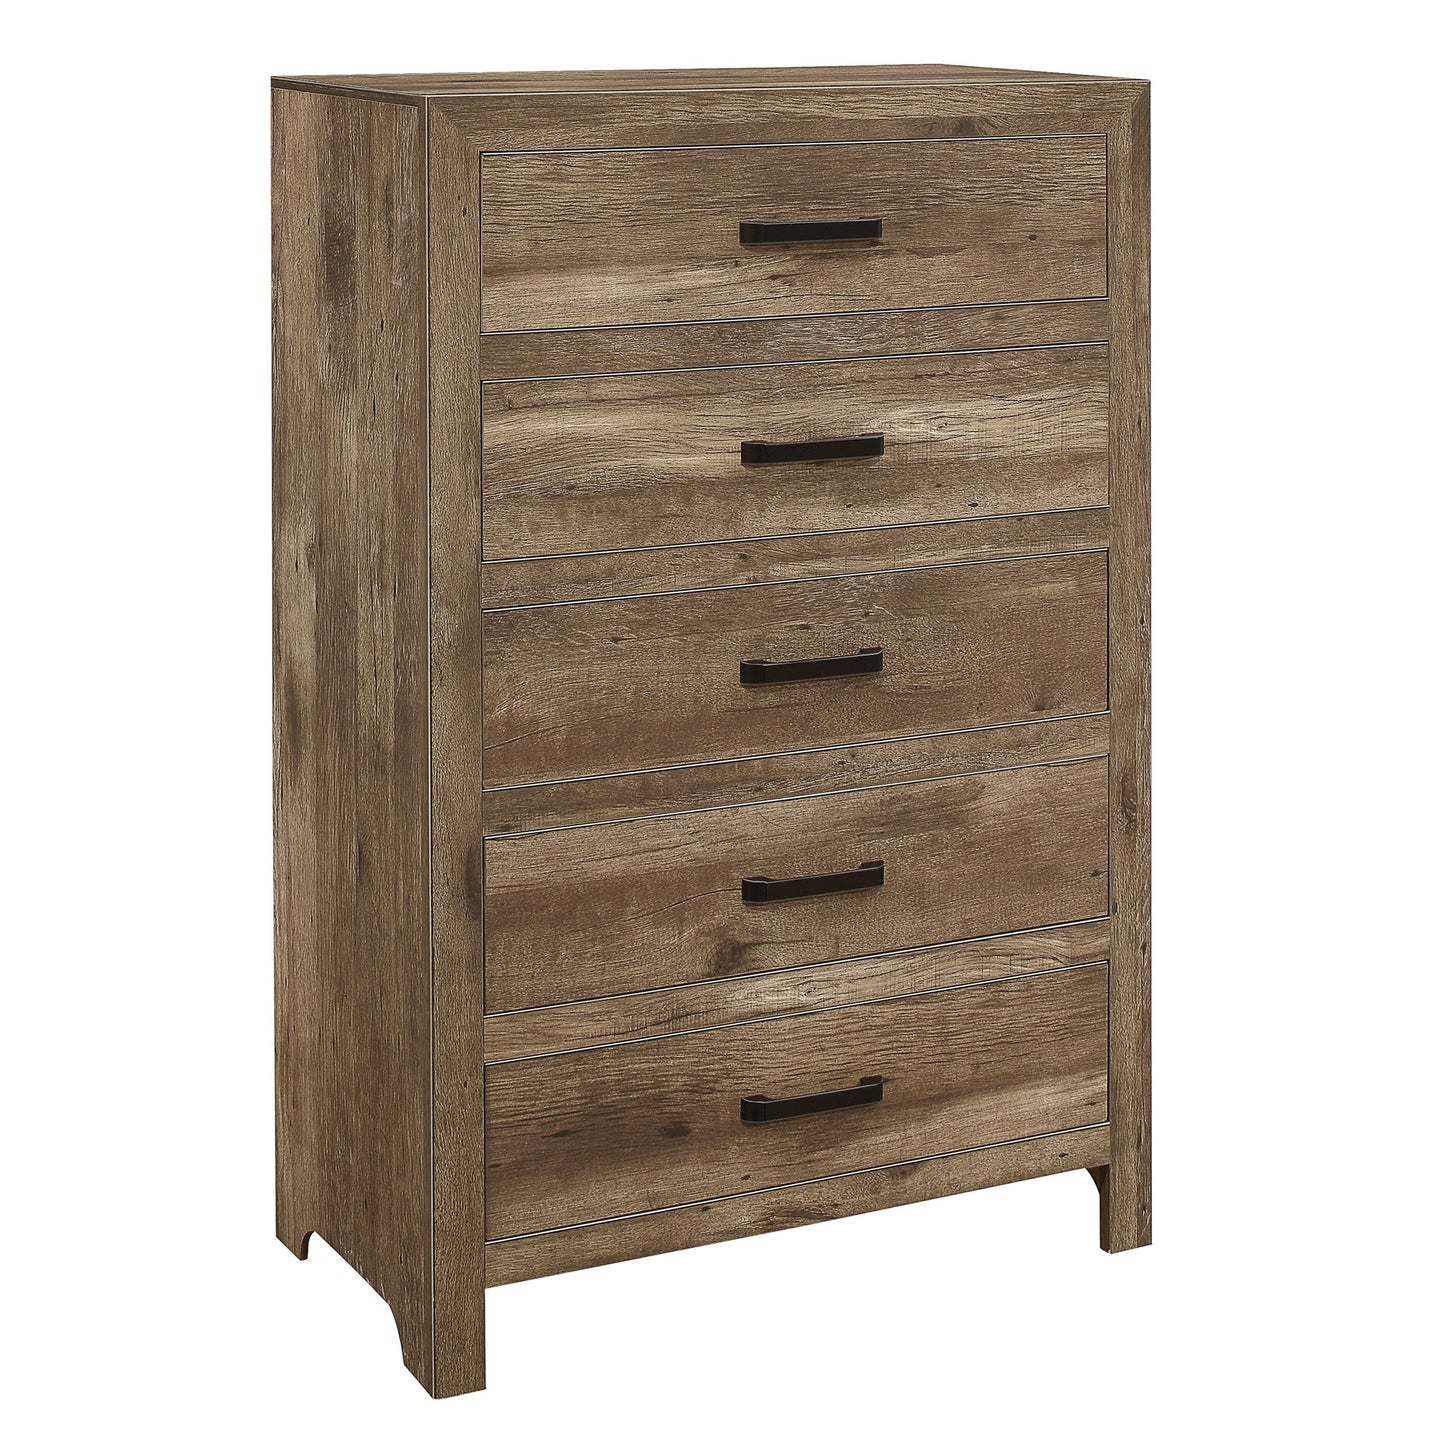 Homlegance Chest Mandan Collection In Weathered Pine Finish